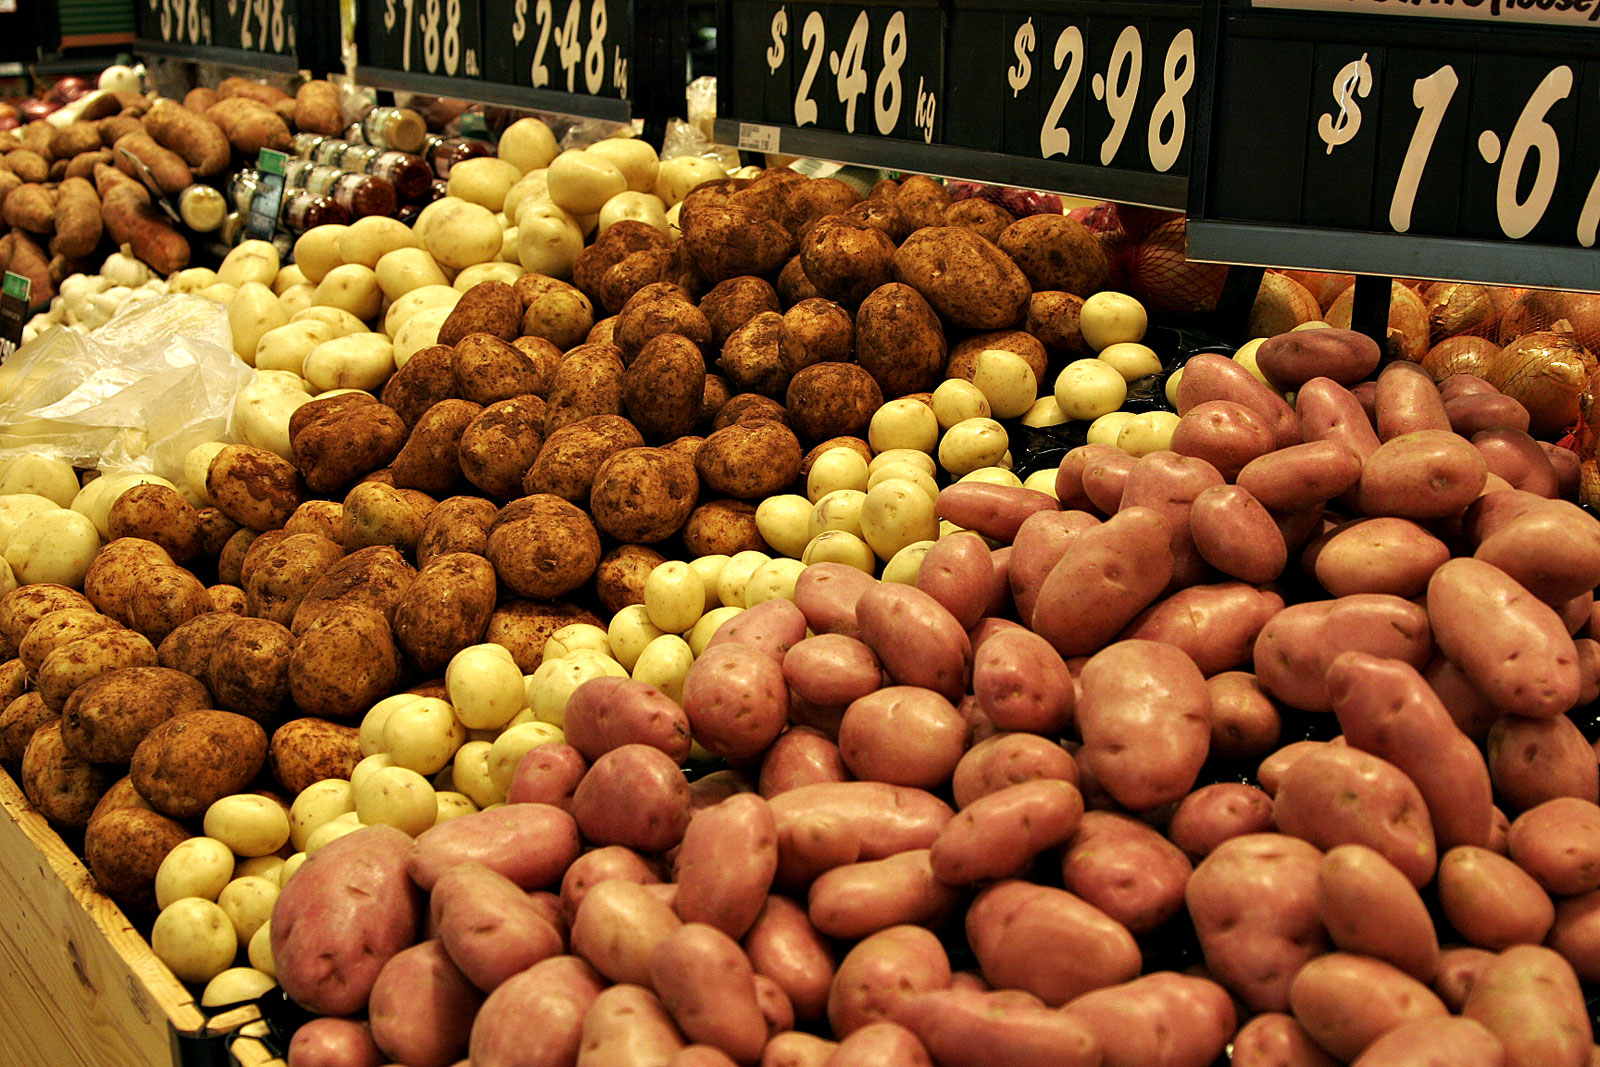 File:Various types of potatoes for sale.jpg - Wikimedia Commons